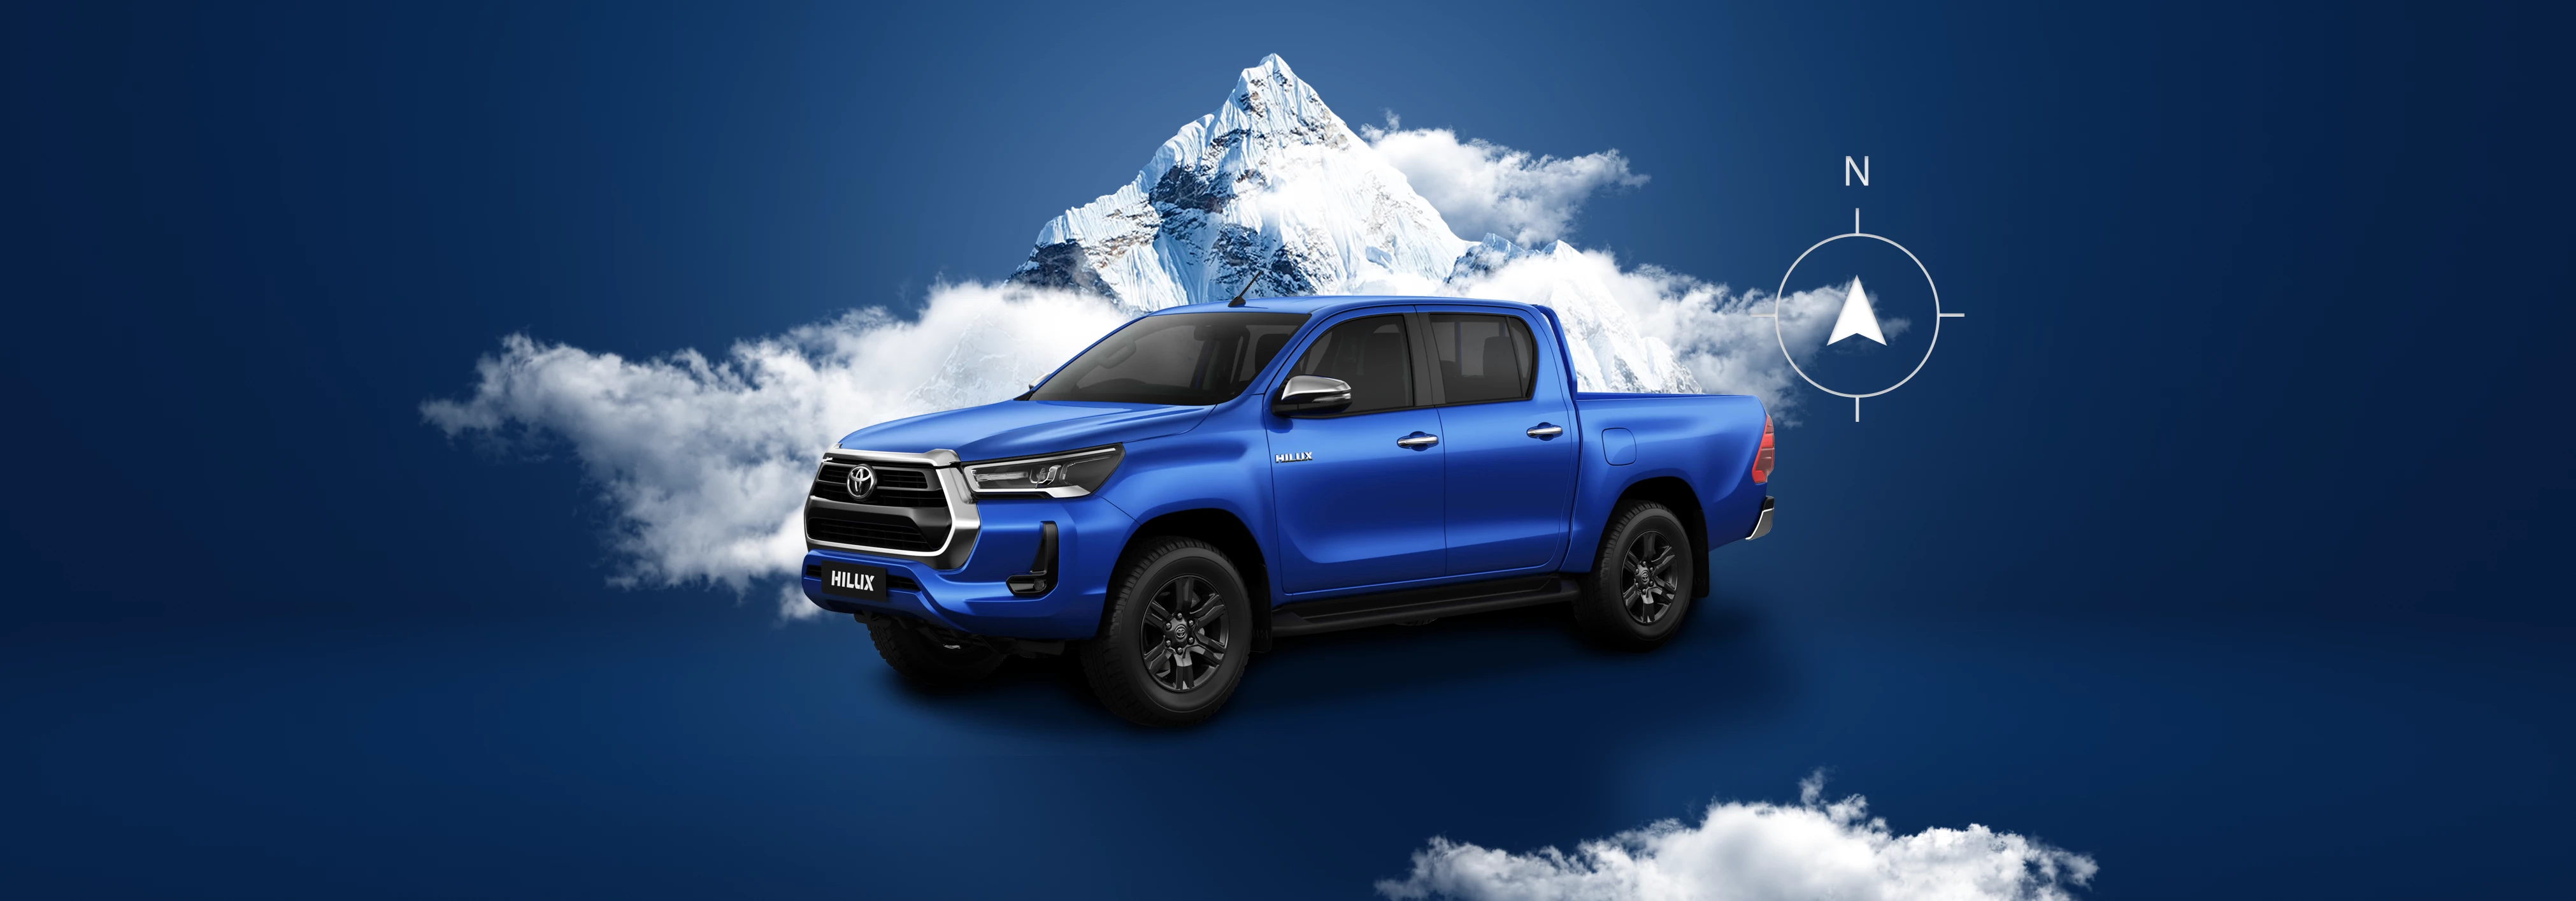 Feature Cover Image DISCOVER THE DETAILS THAT MAKE THE NEW TOYOTA HILUX EXCEPTIONAL